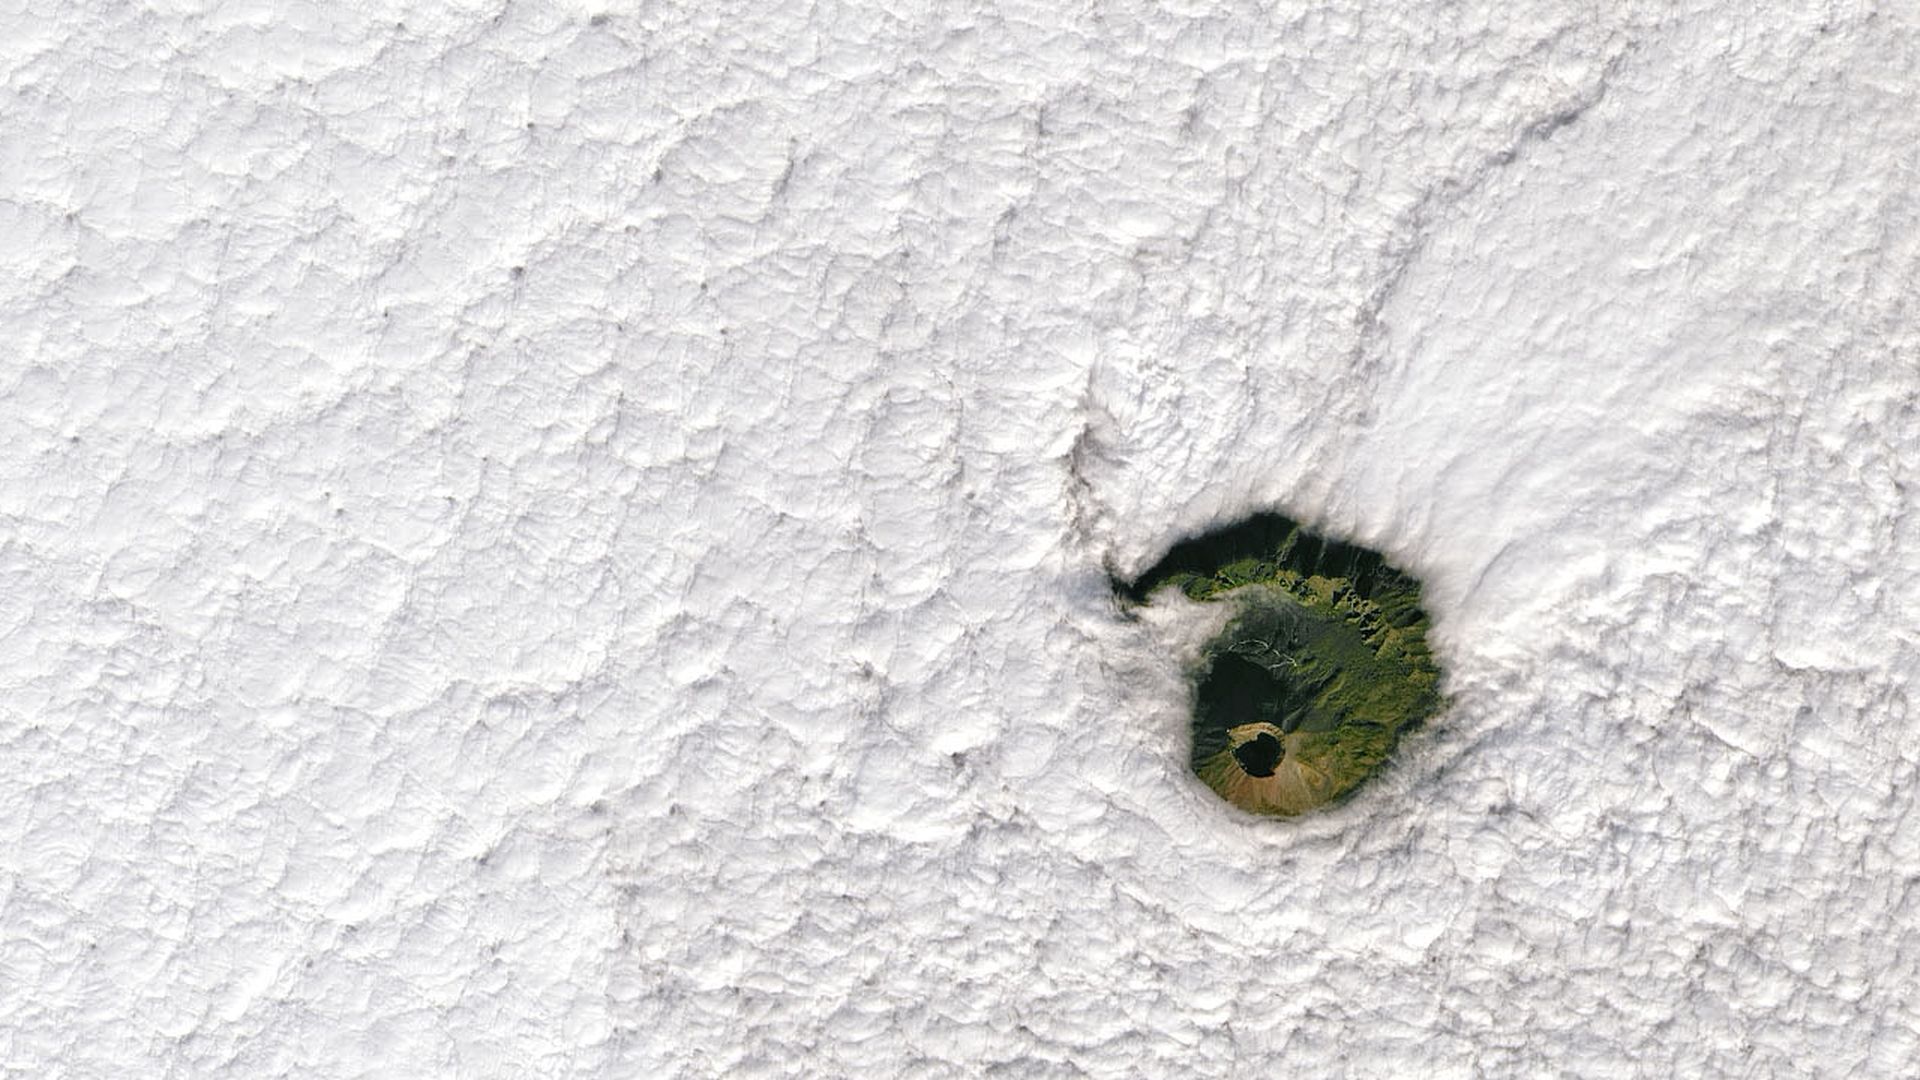 Mount Vesuvius seen poking through the clouds by a satellite